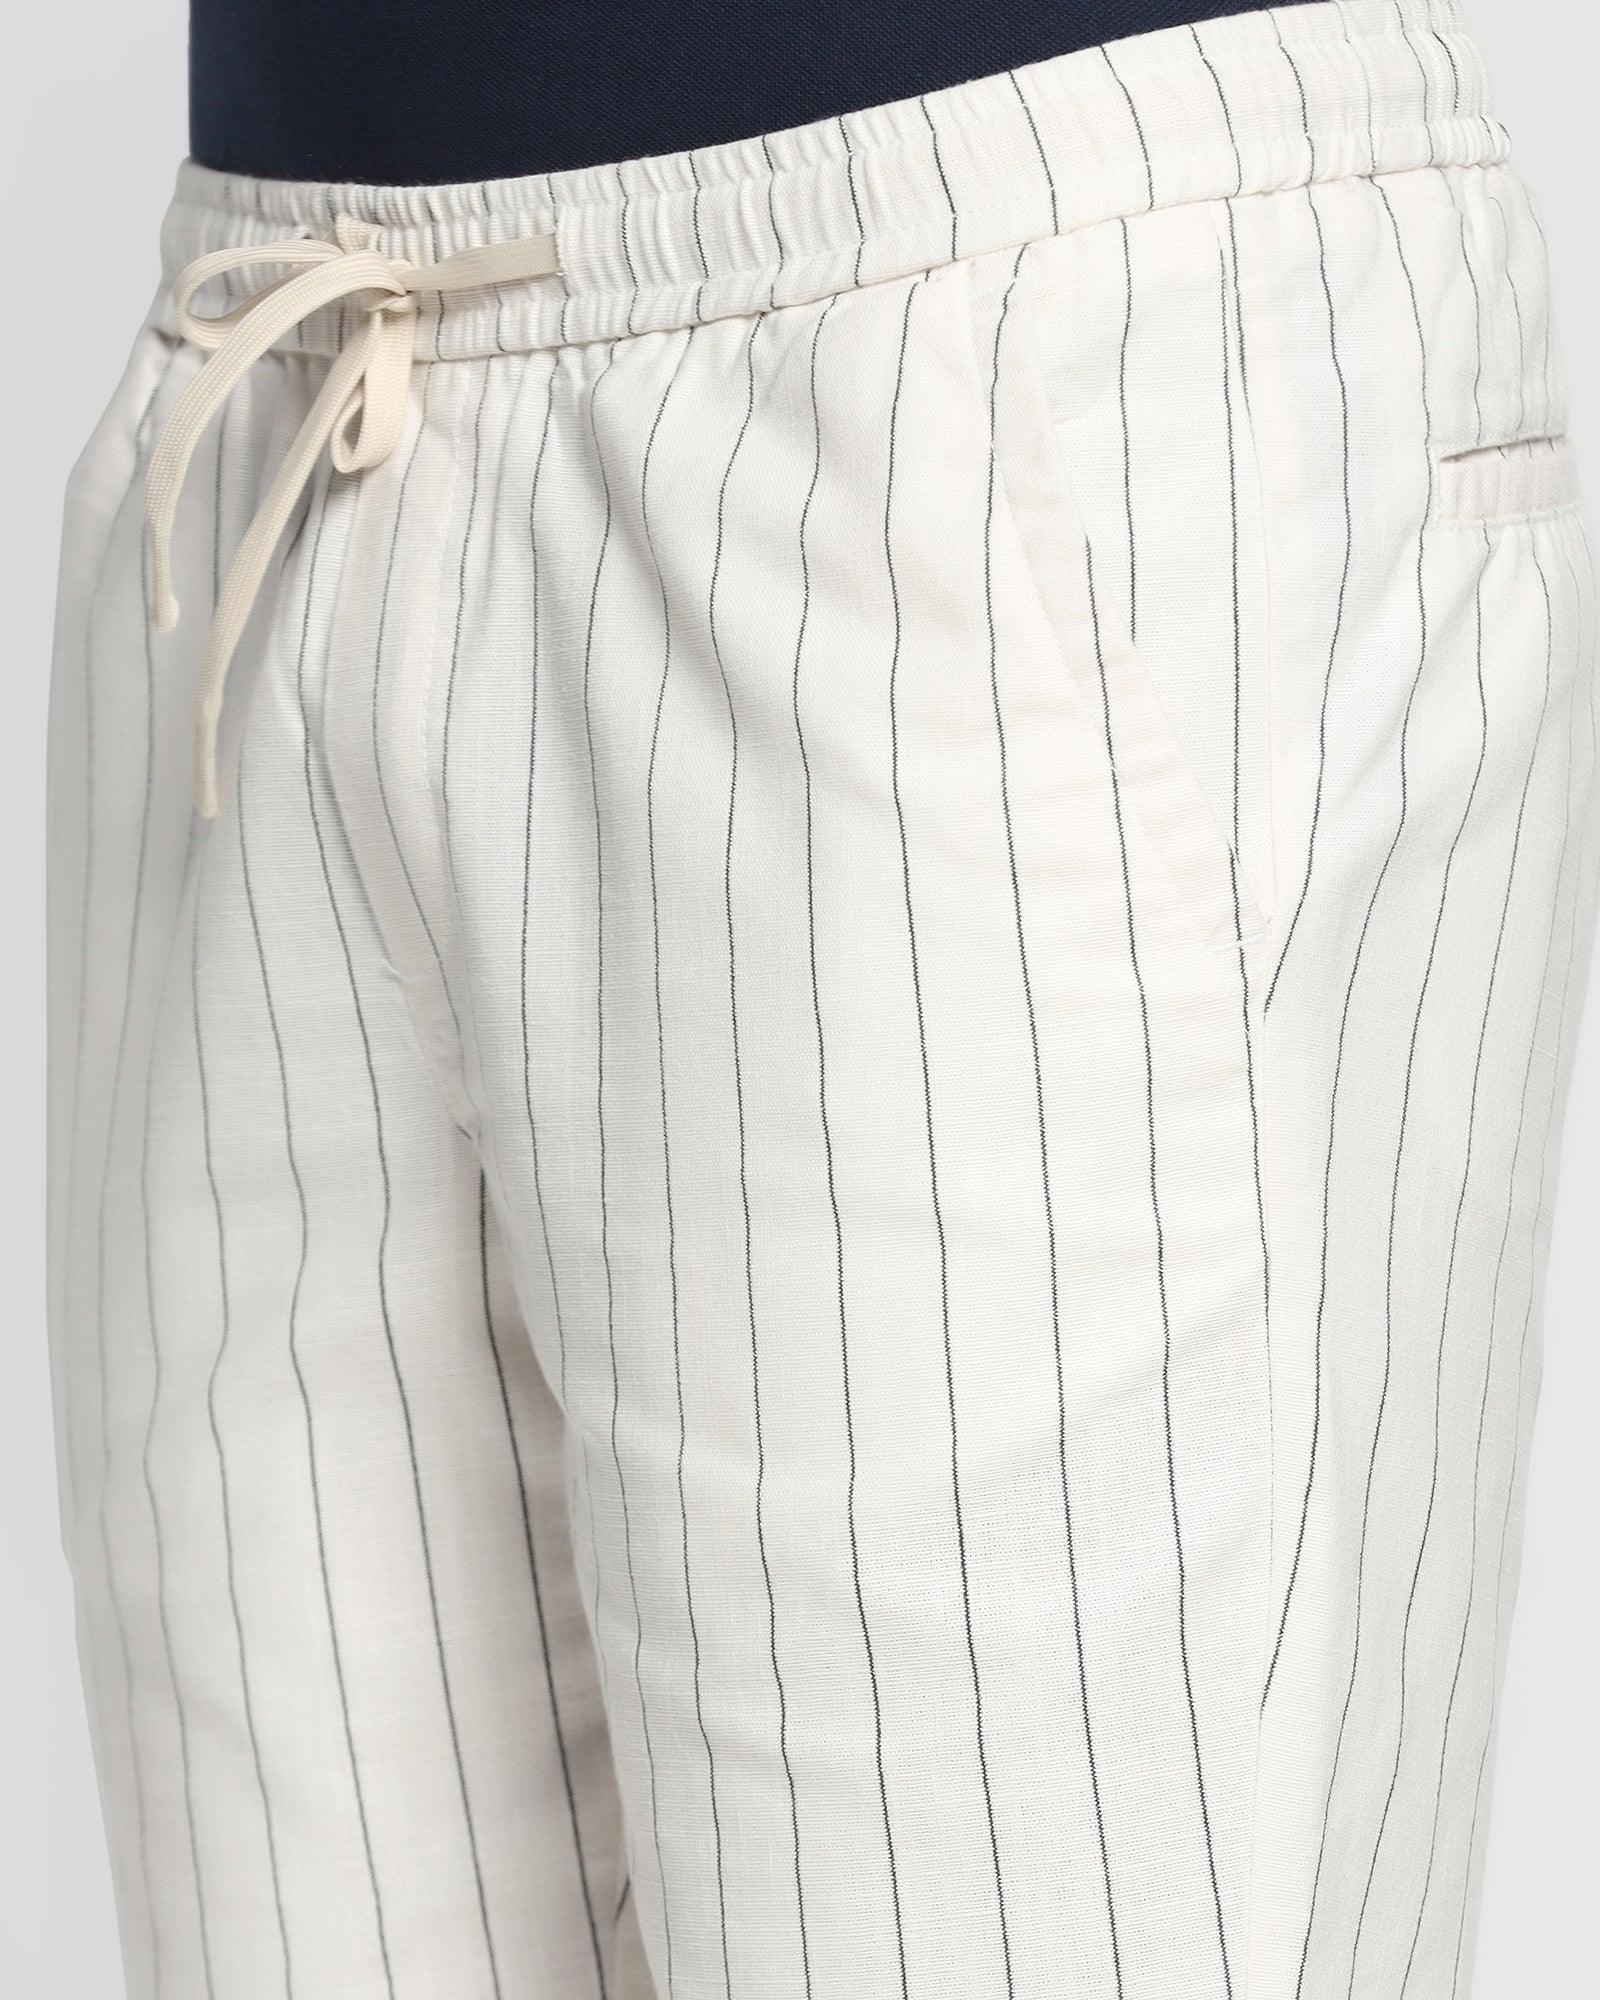 Casual Beige Striped Shorts - Carry